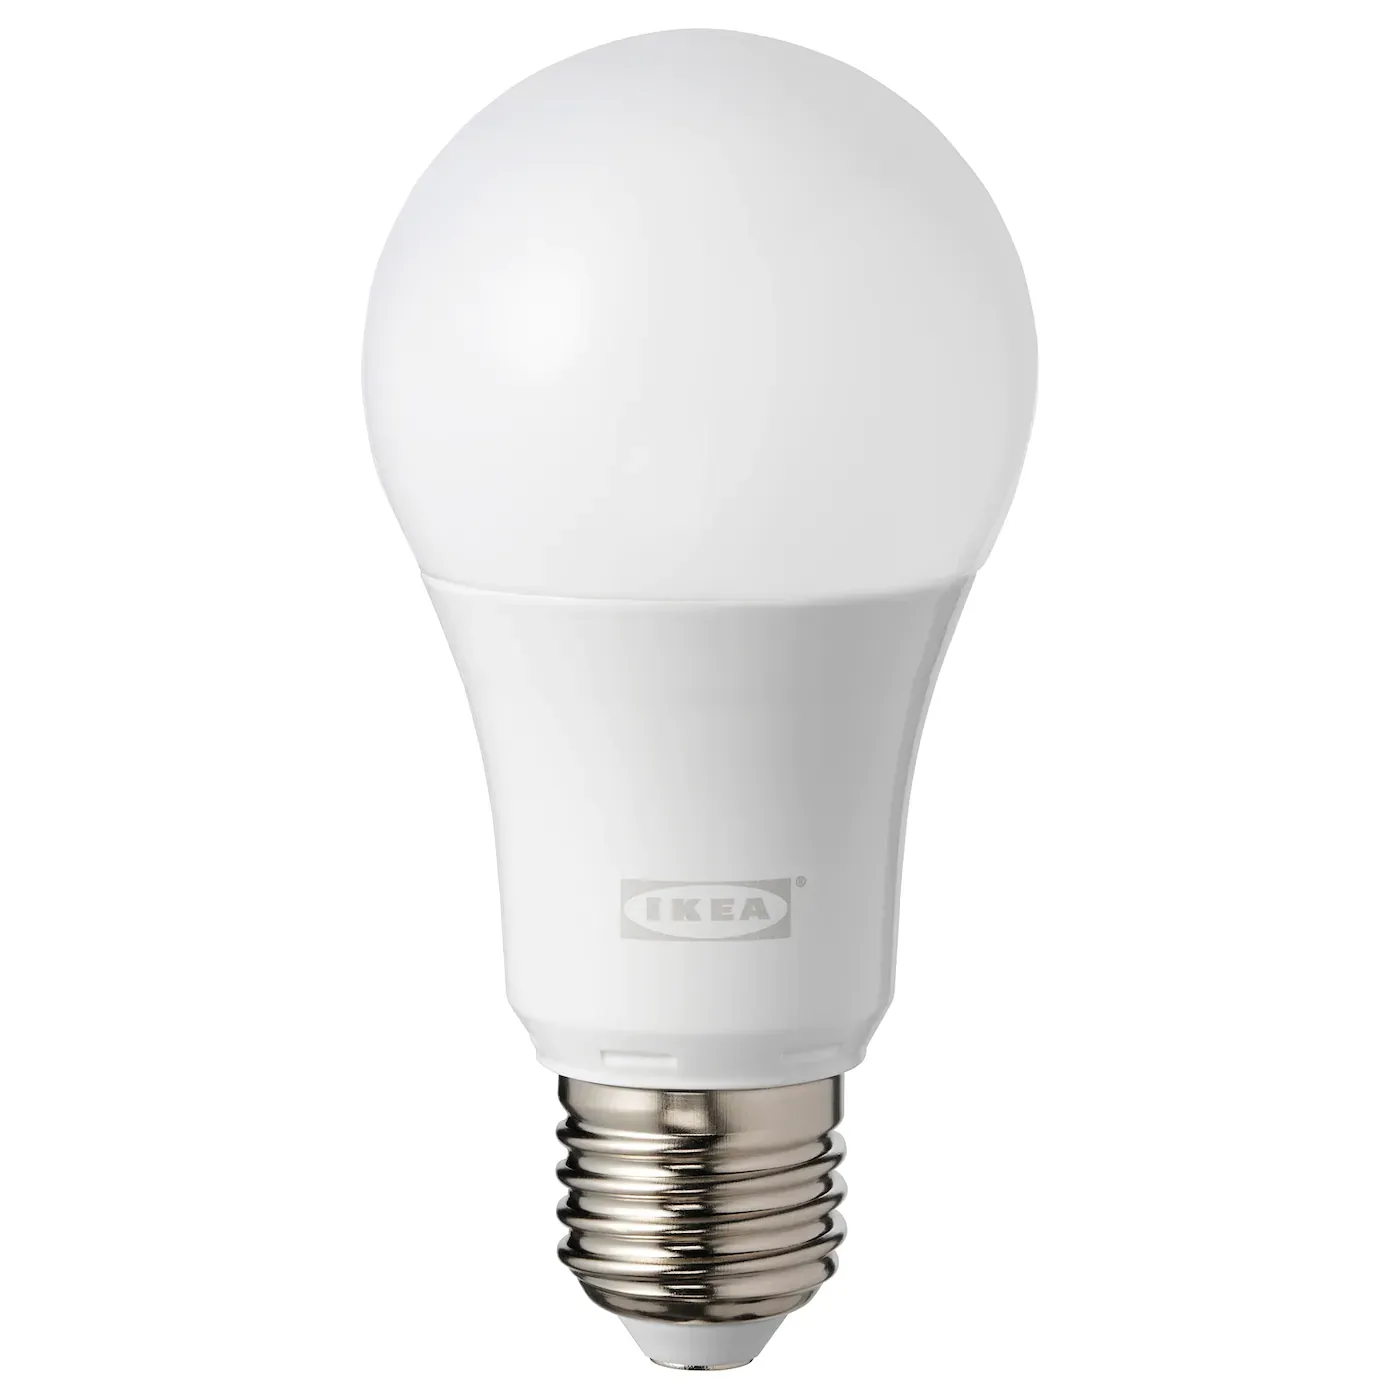 Tradfri LED bulb E27 600lm, dimmable colour and white spectrum opal white